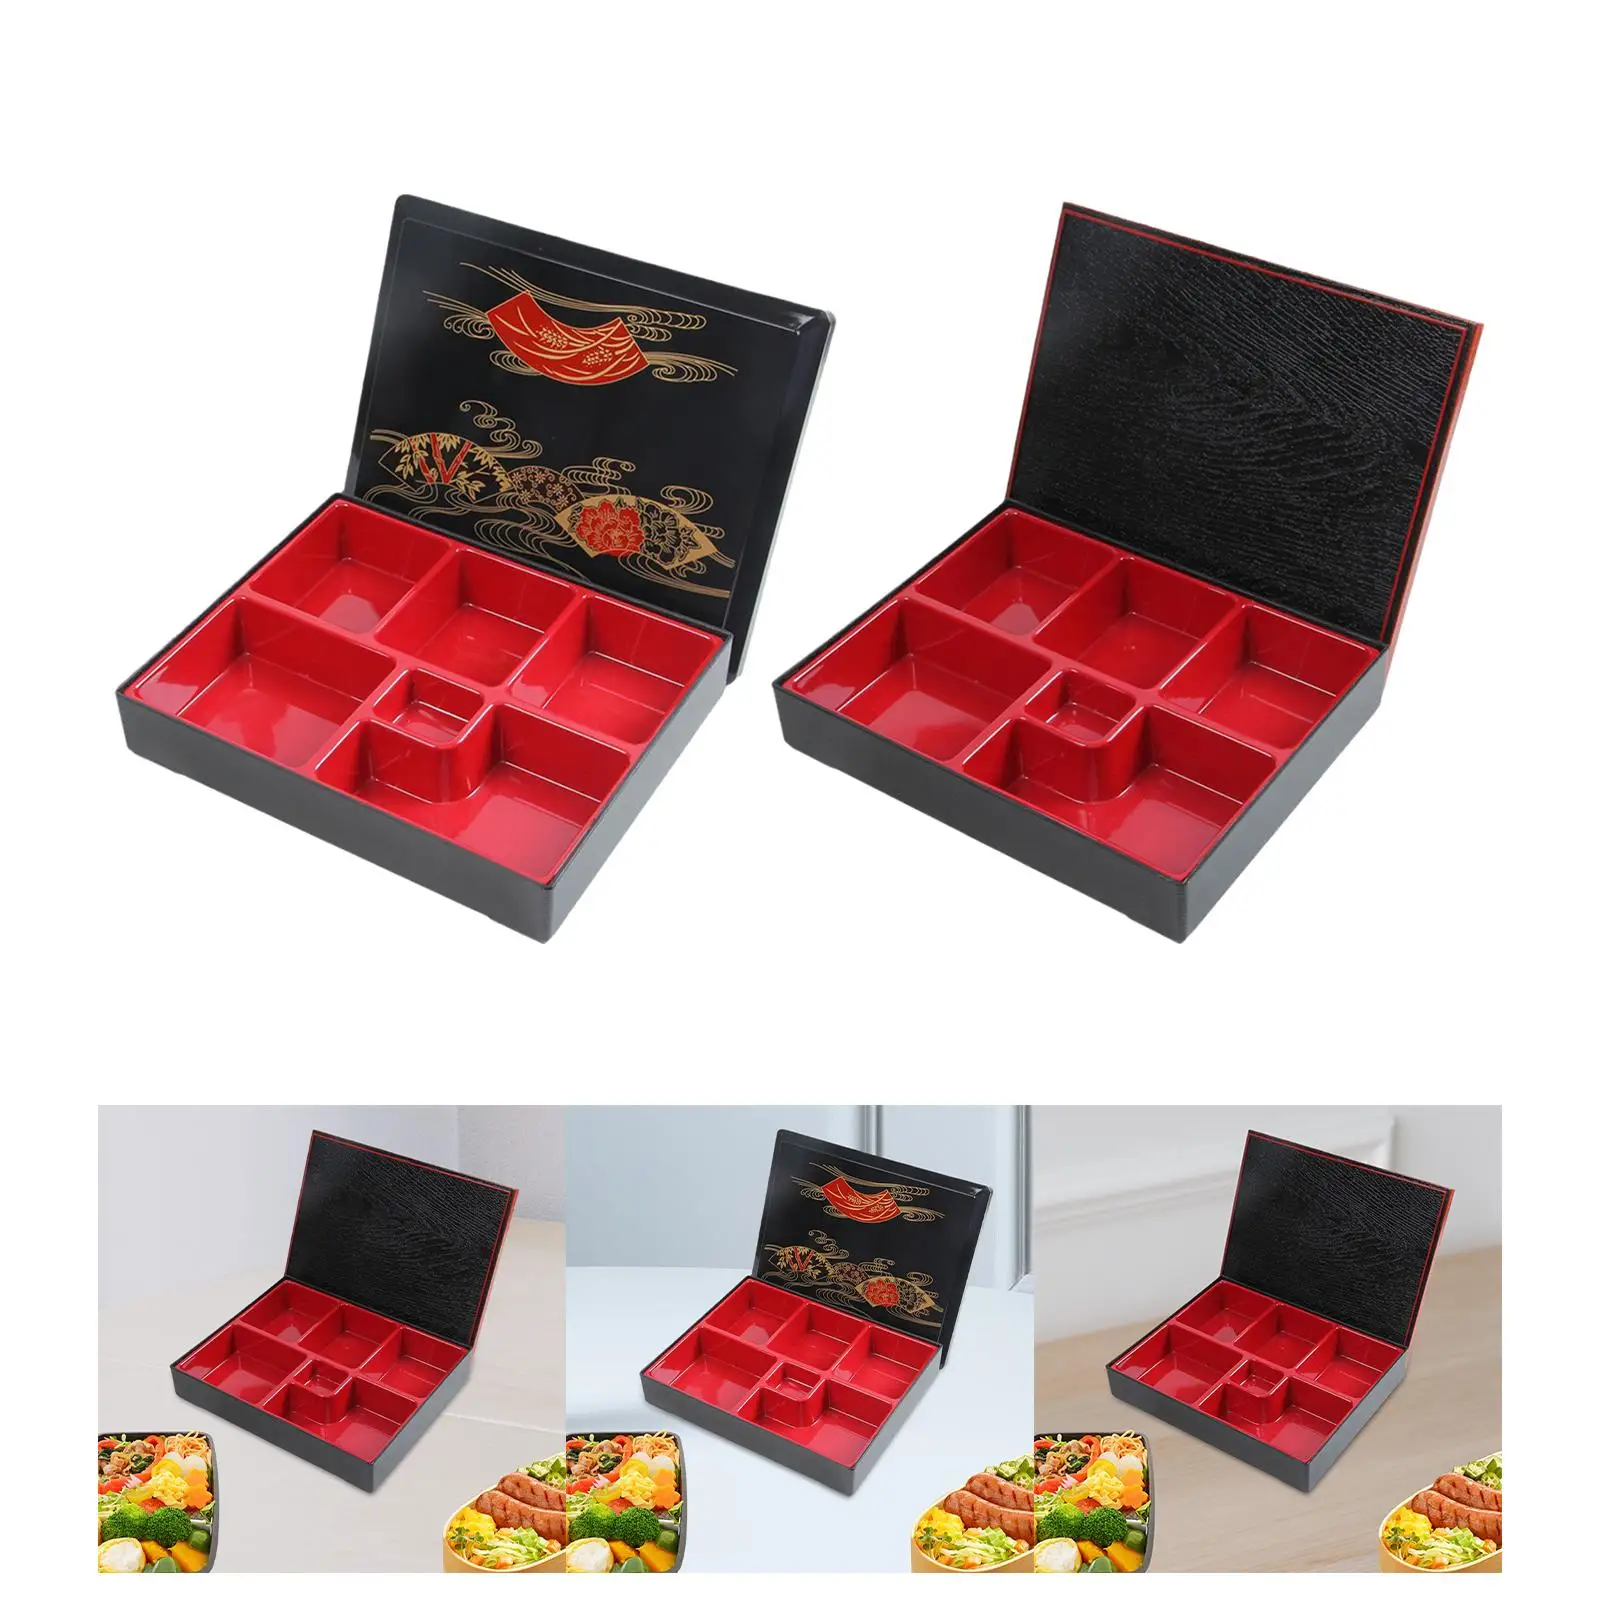 Japanese Bento Box Red and Black with Lid Snack Serving Tray Serving Dish for Picnic Restaurant Office Home Sushi, Rice, Sauce